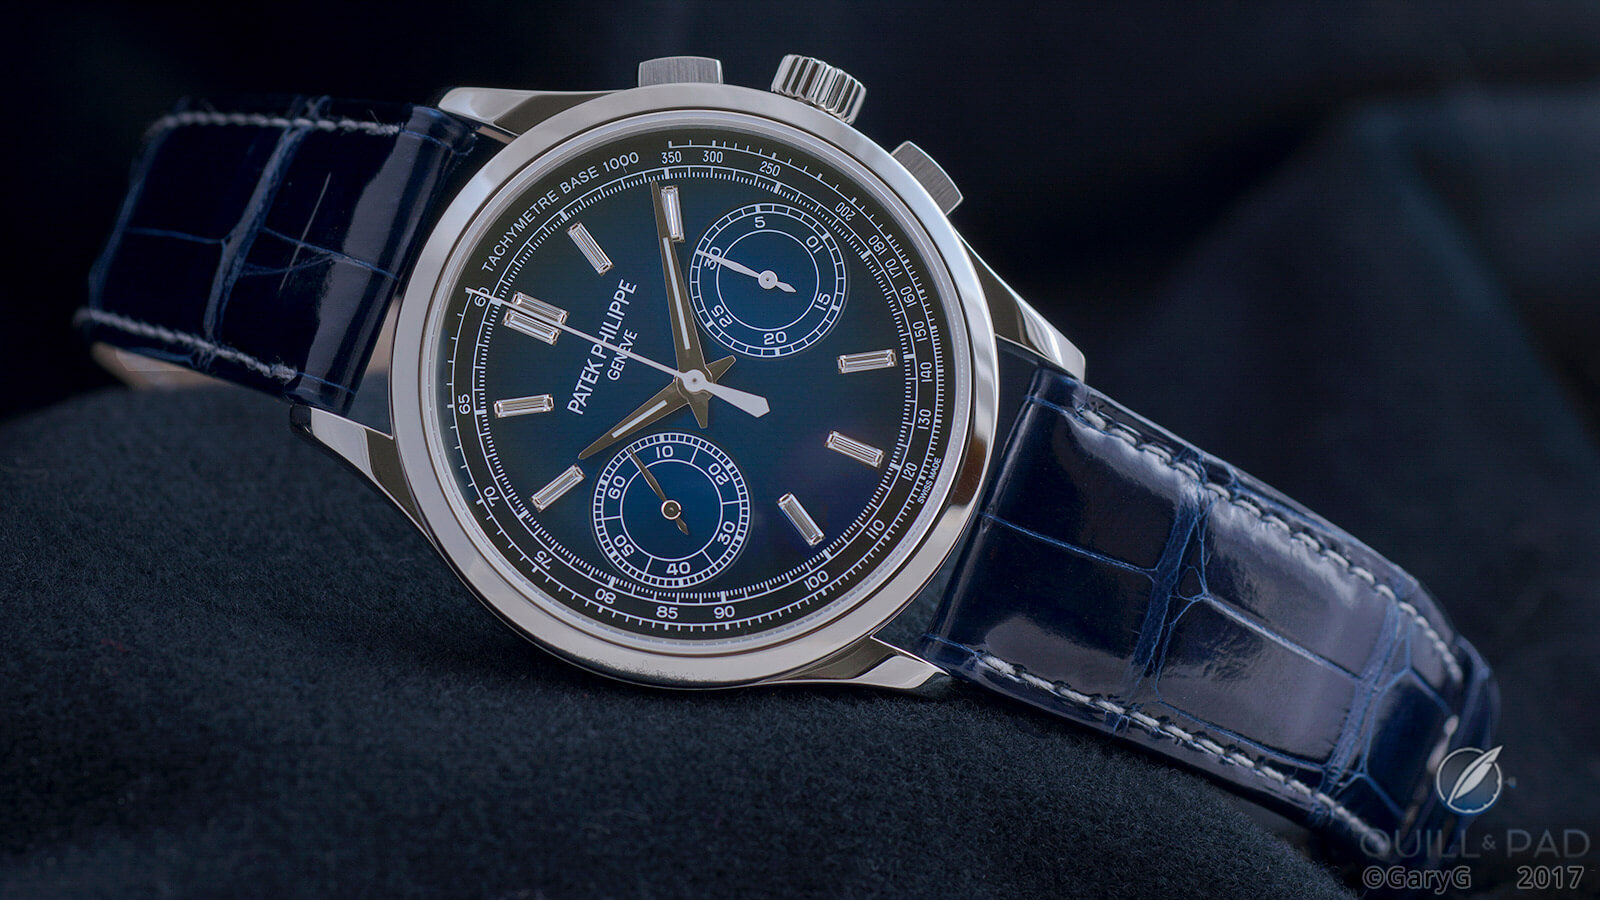 To bling or not to bling: diamond details in the form of batons on the Patek Philippe Reference 5170P